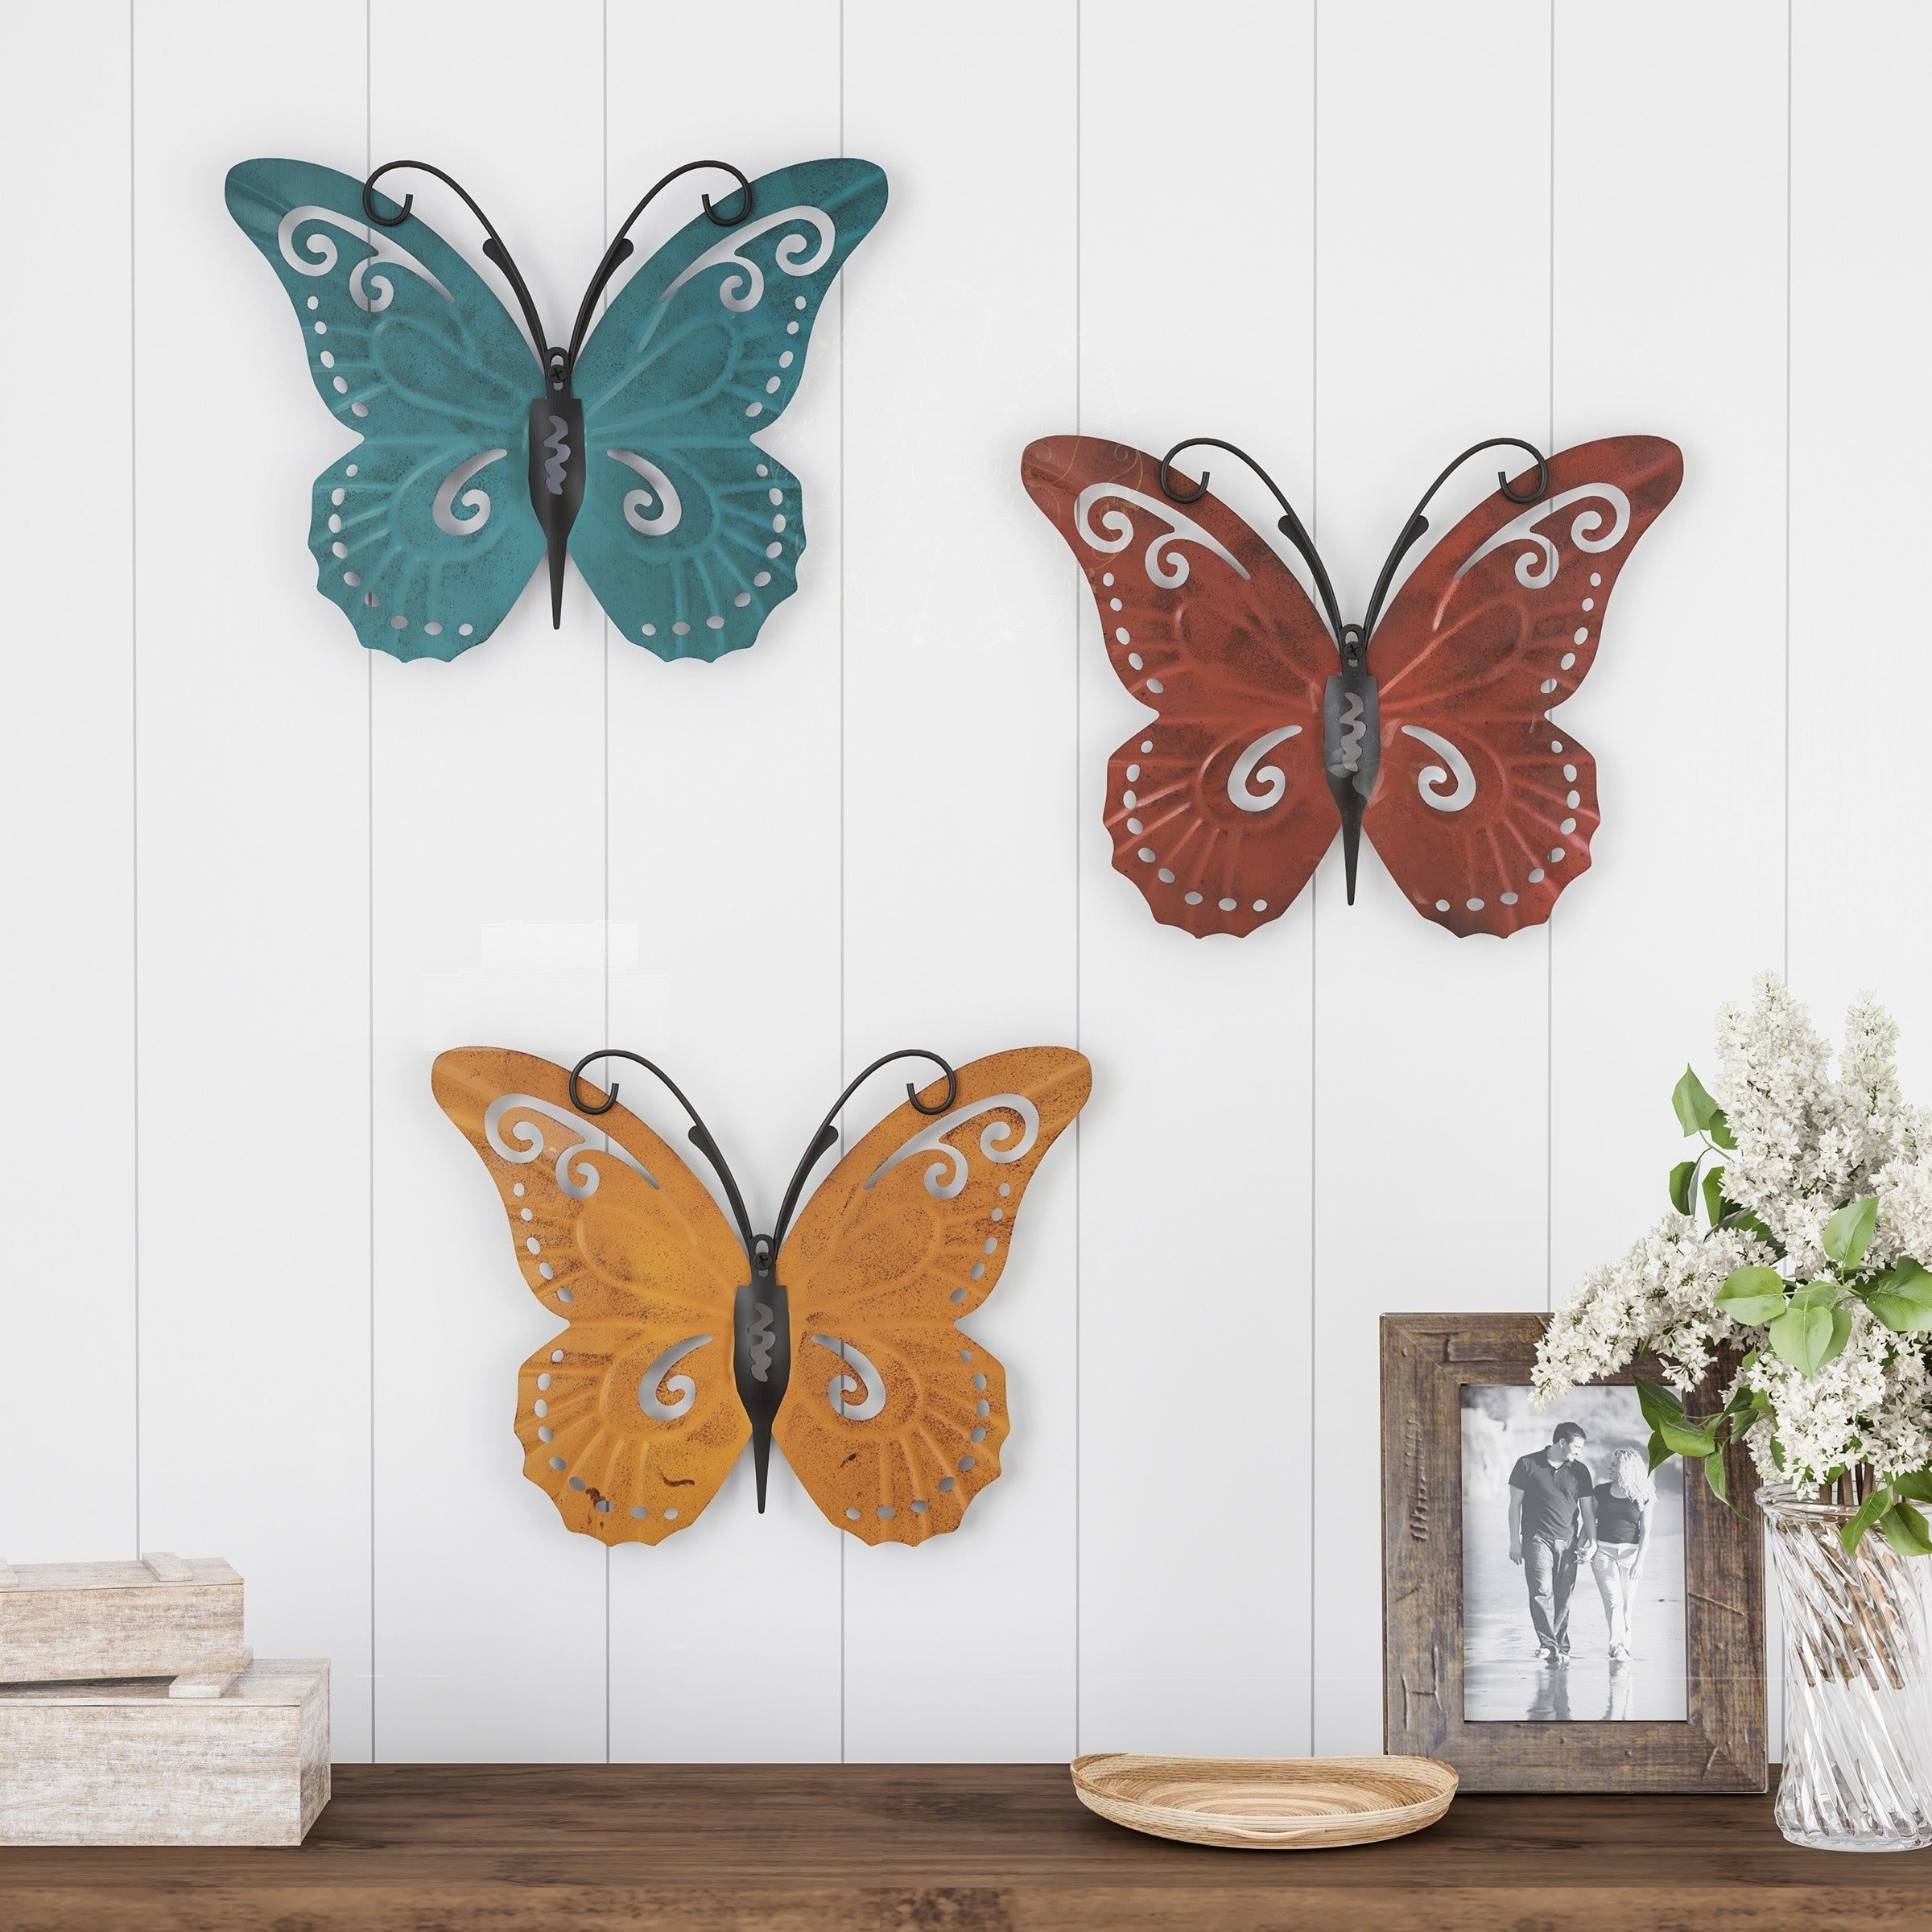 Butterfly Metal Wall Art 3 Piece Set  Hand Painted Decorative 3D Nature Pertaining To 3 Piece Metal Wall Art Set (View 11 of 15)